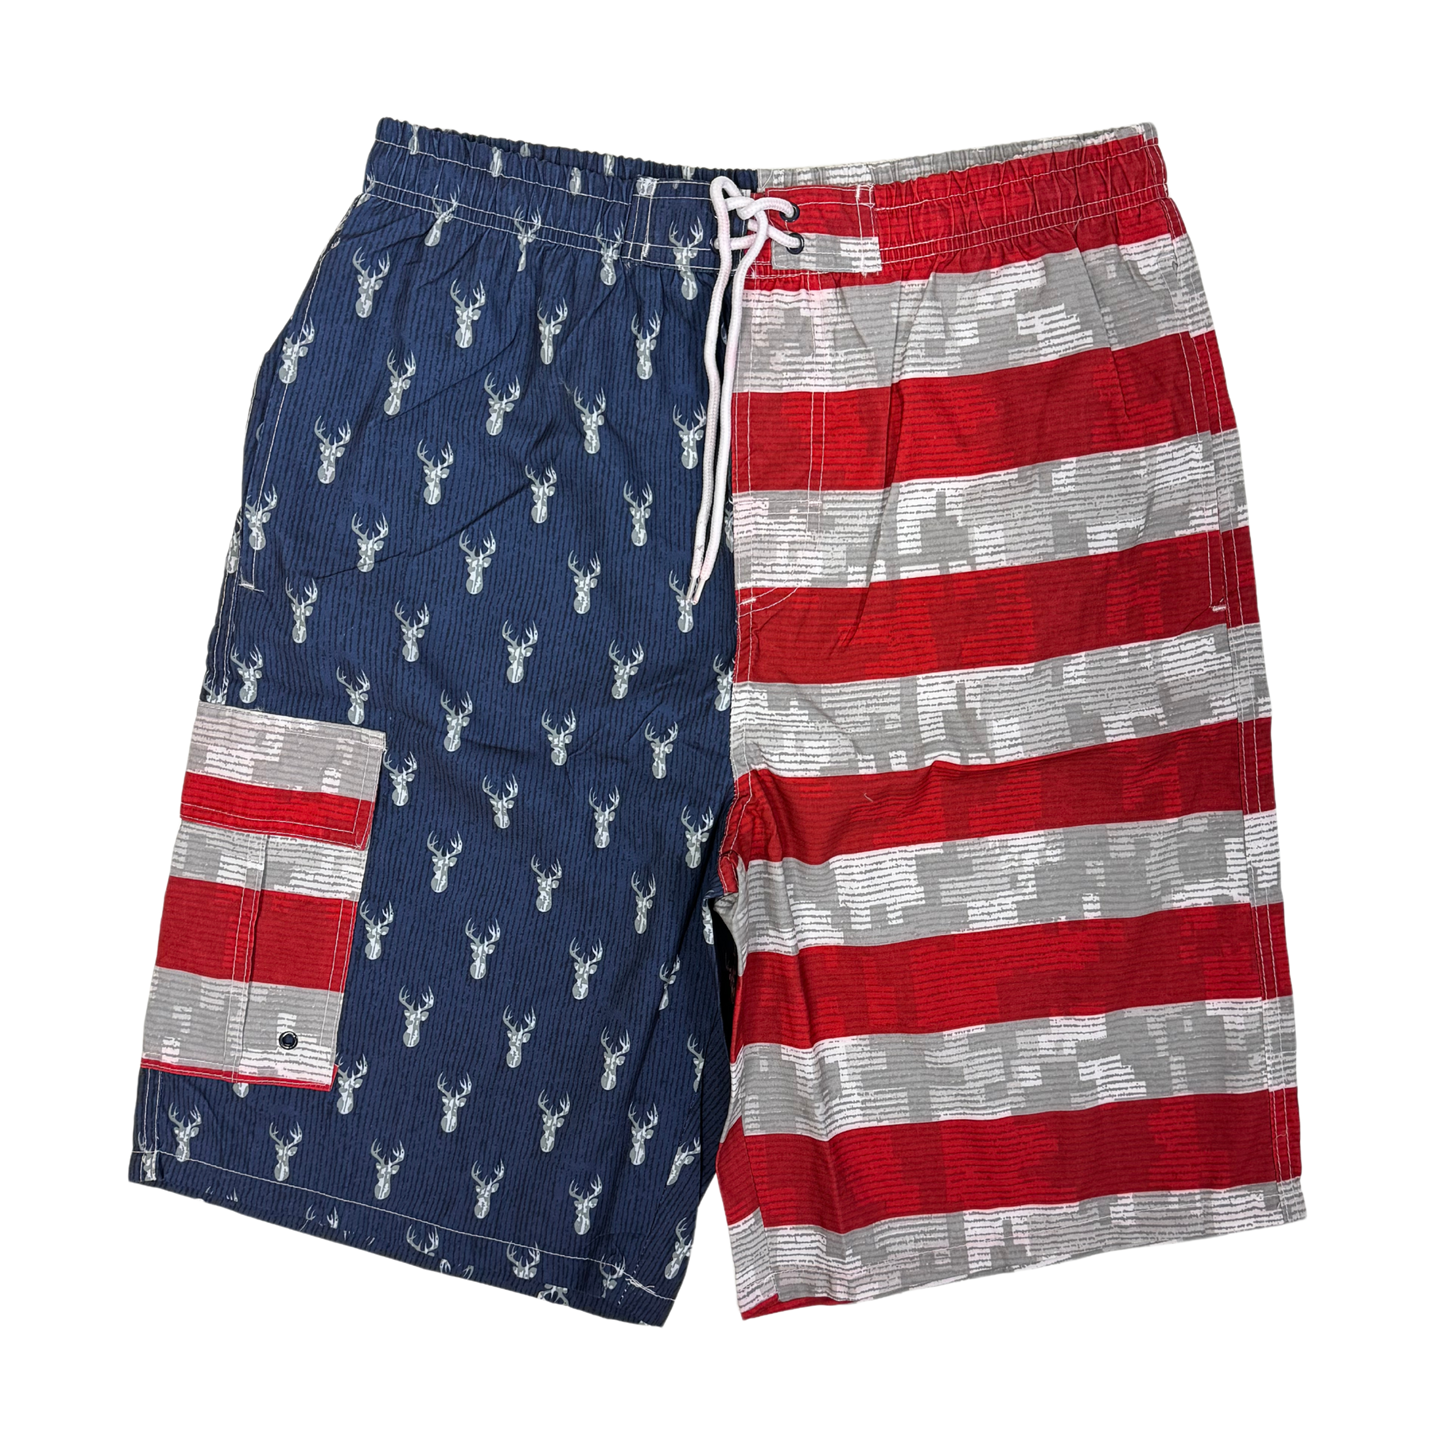 PREMIERE BATHING SUITS: USA RED WHITE BLUE DEERS